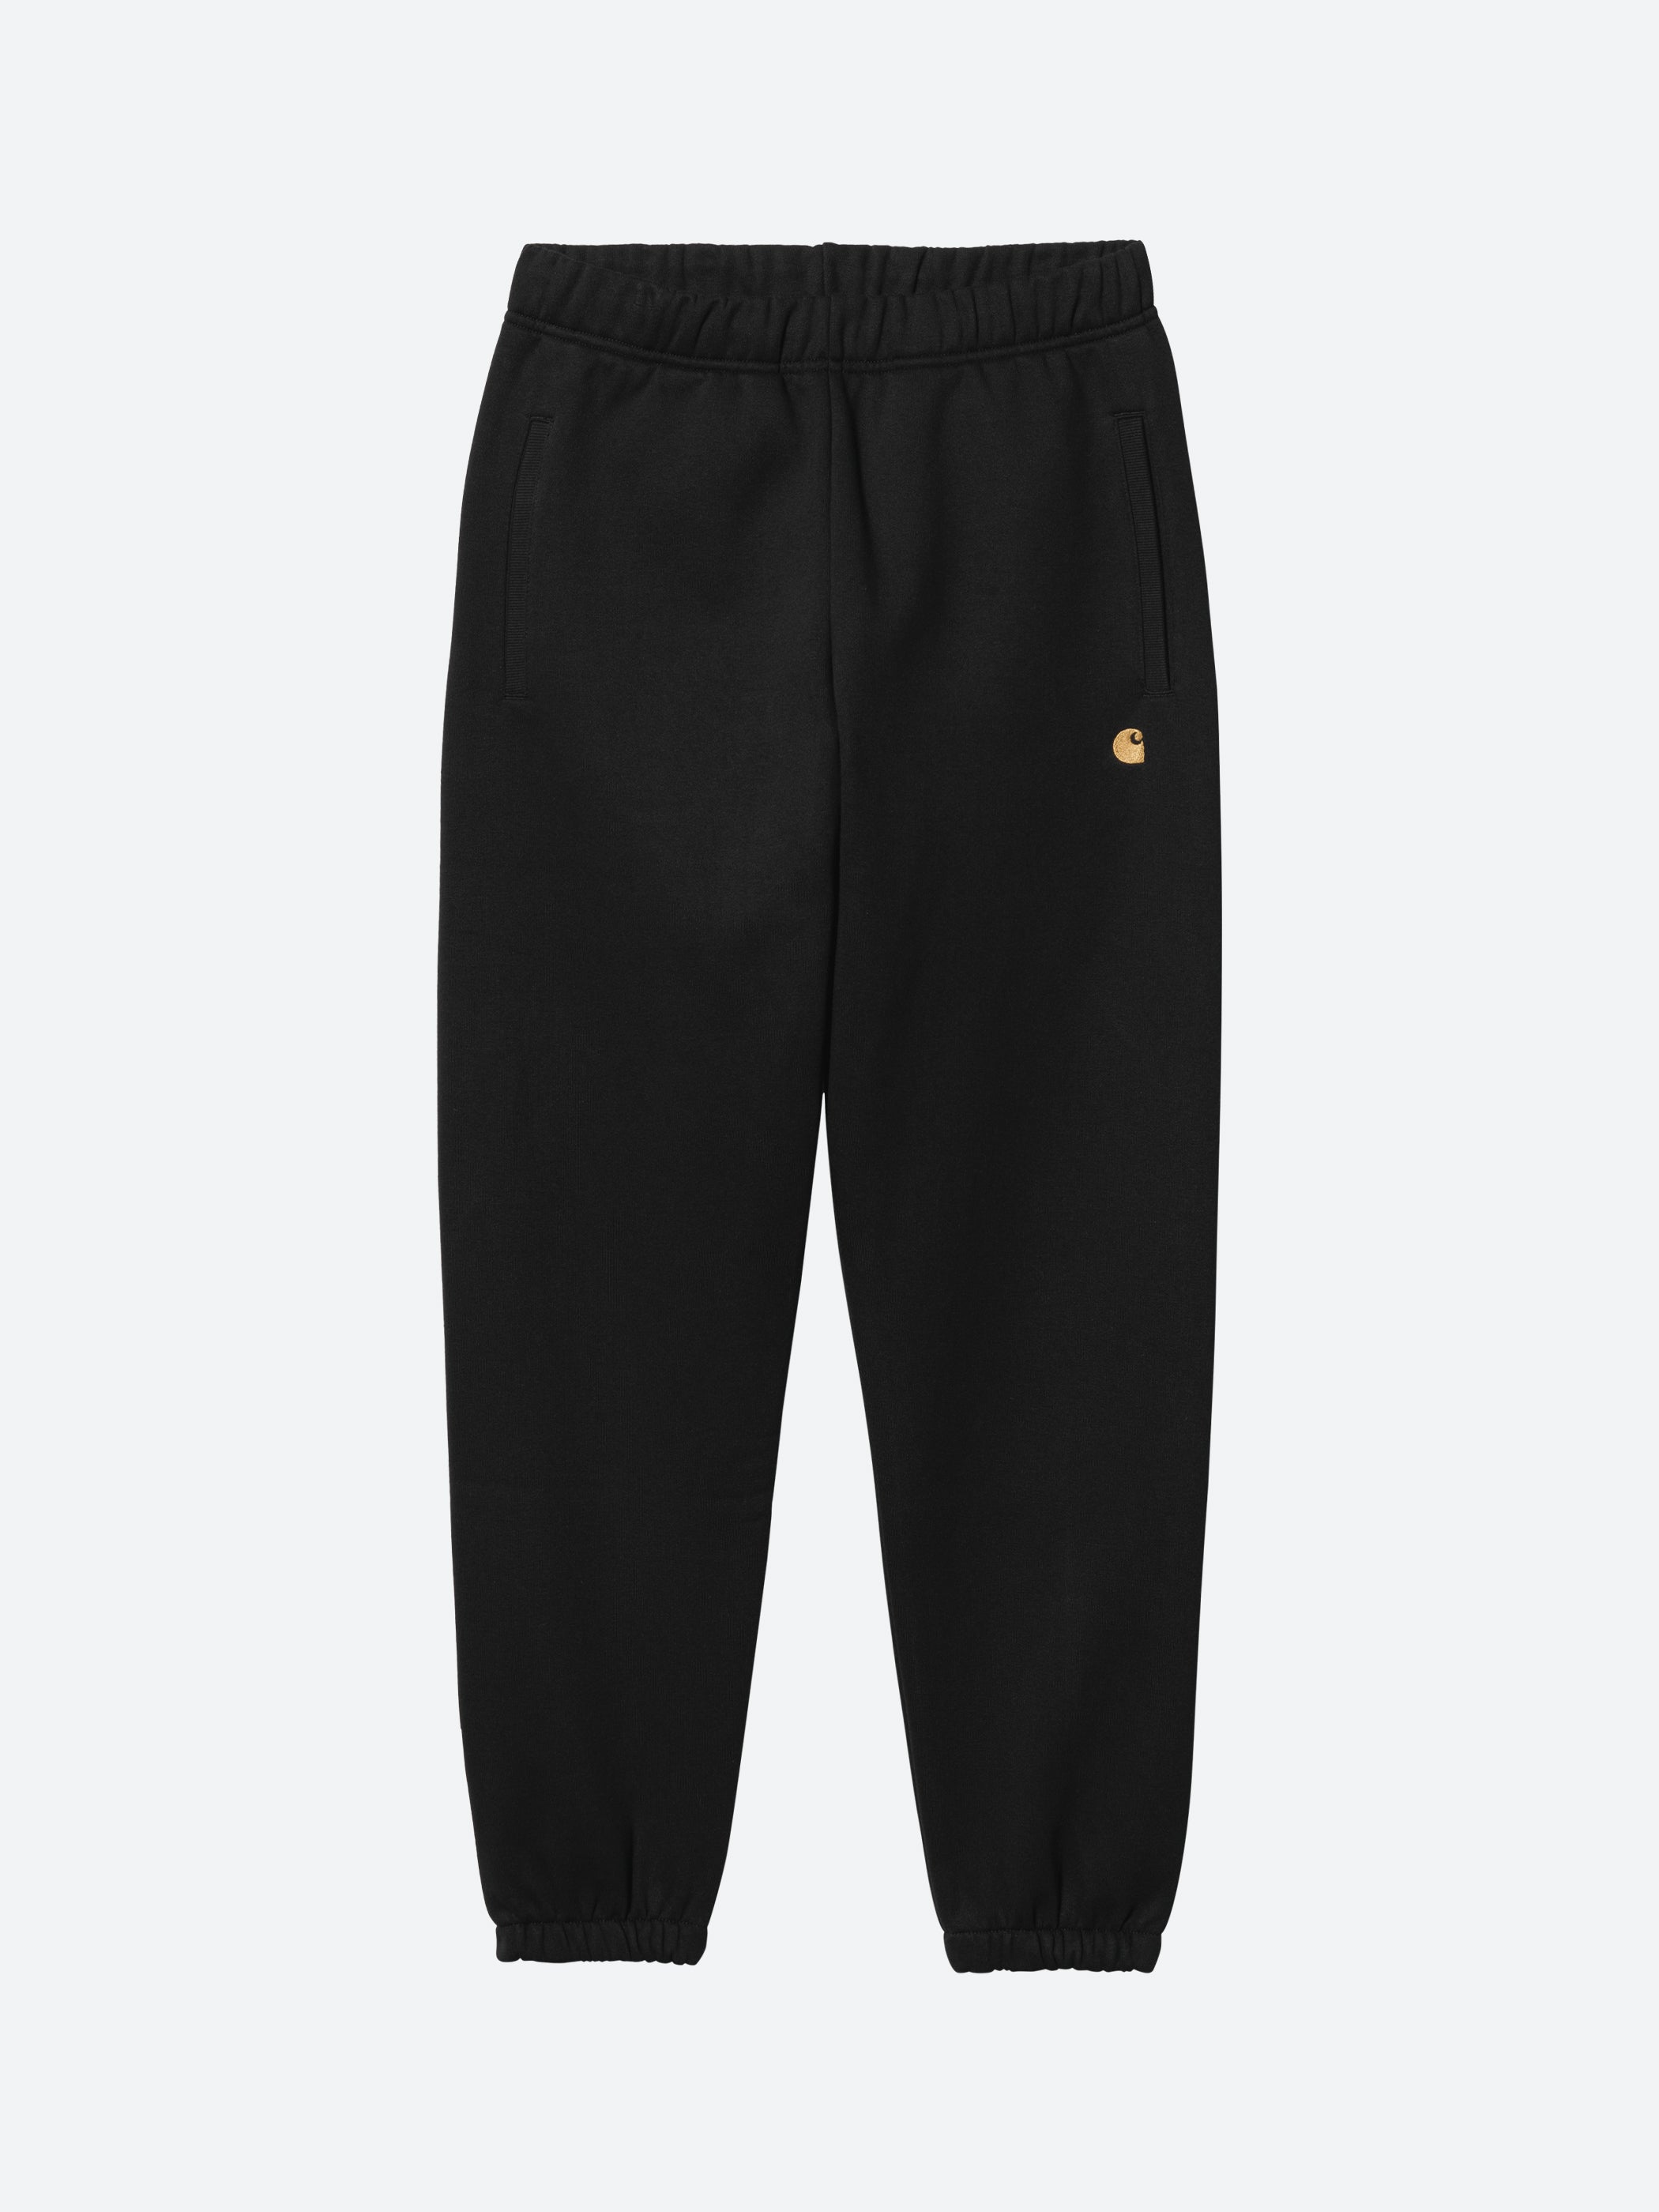 Carhartt Women's Relaxed Fit Sweatpants - Traditions Clothing & Gift Shop